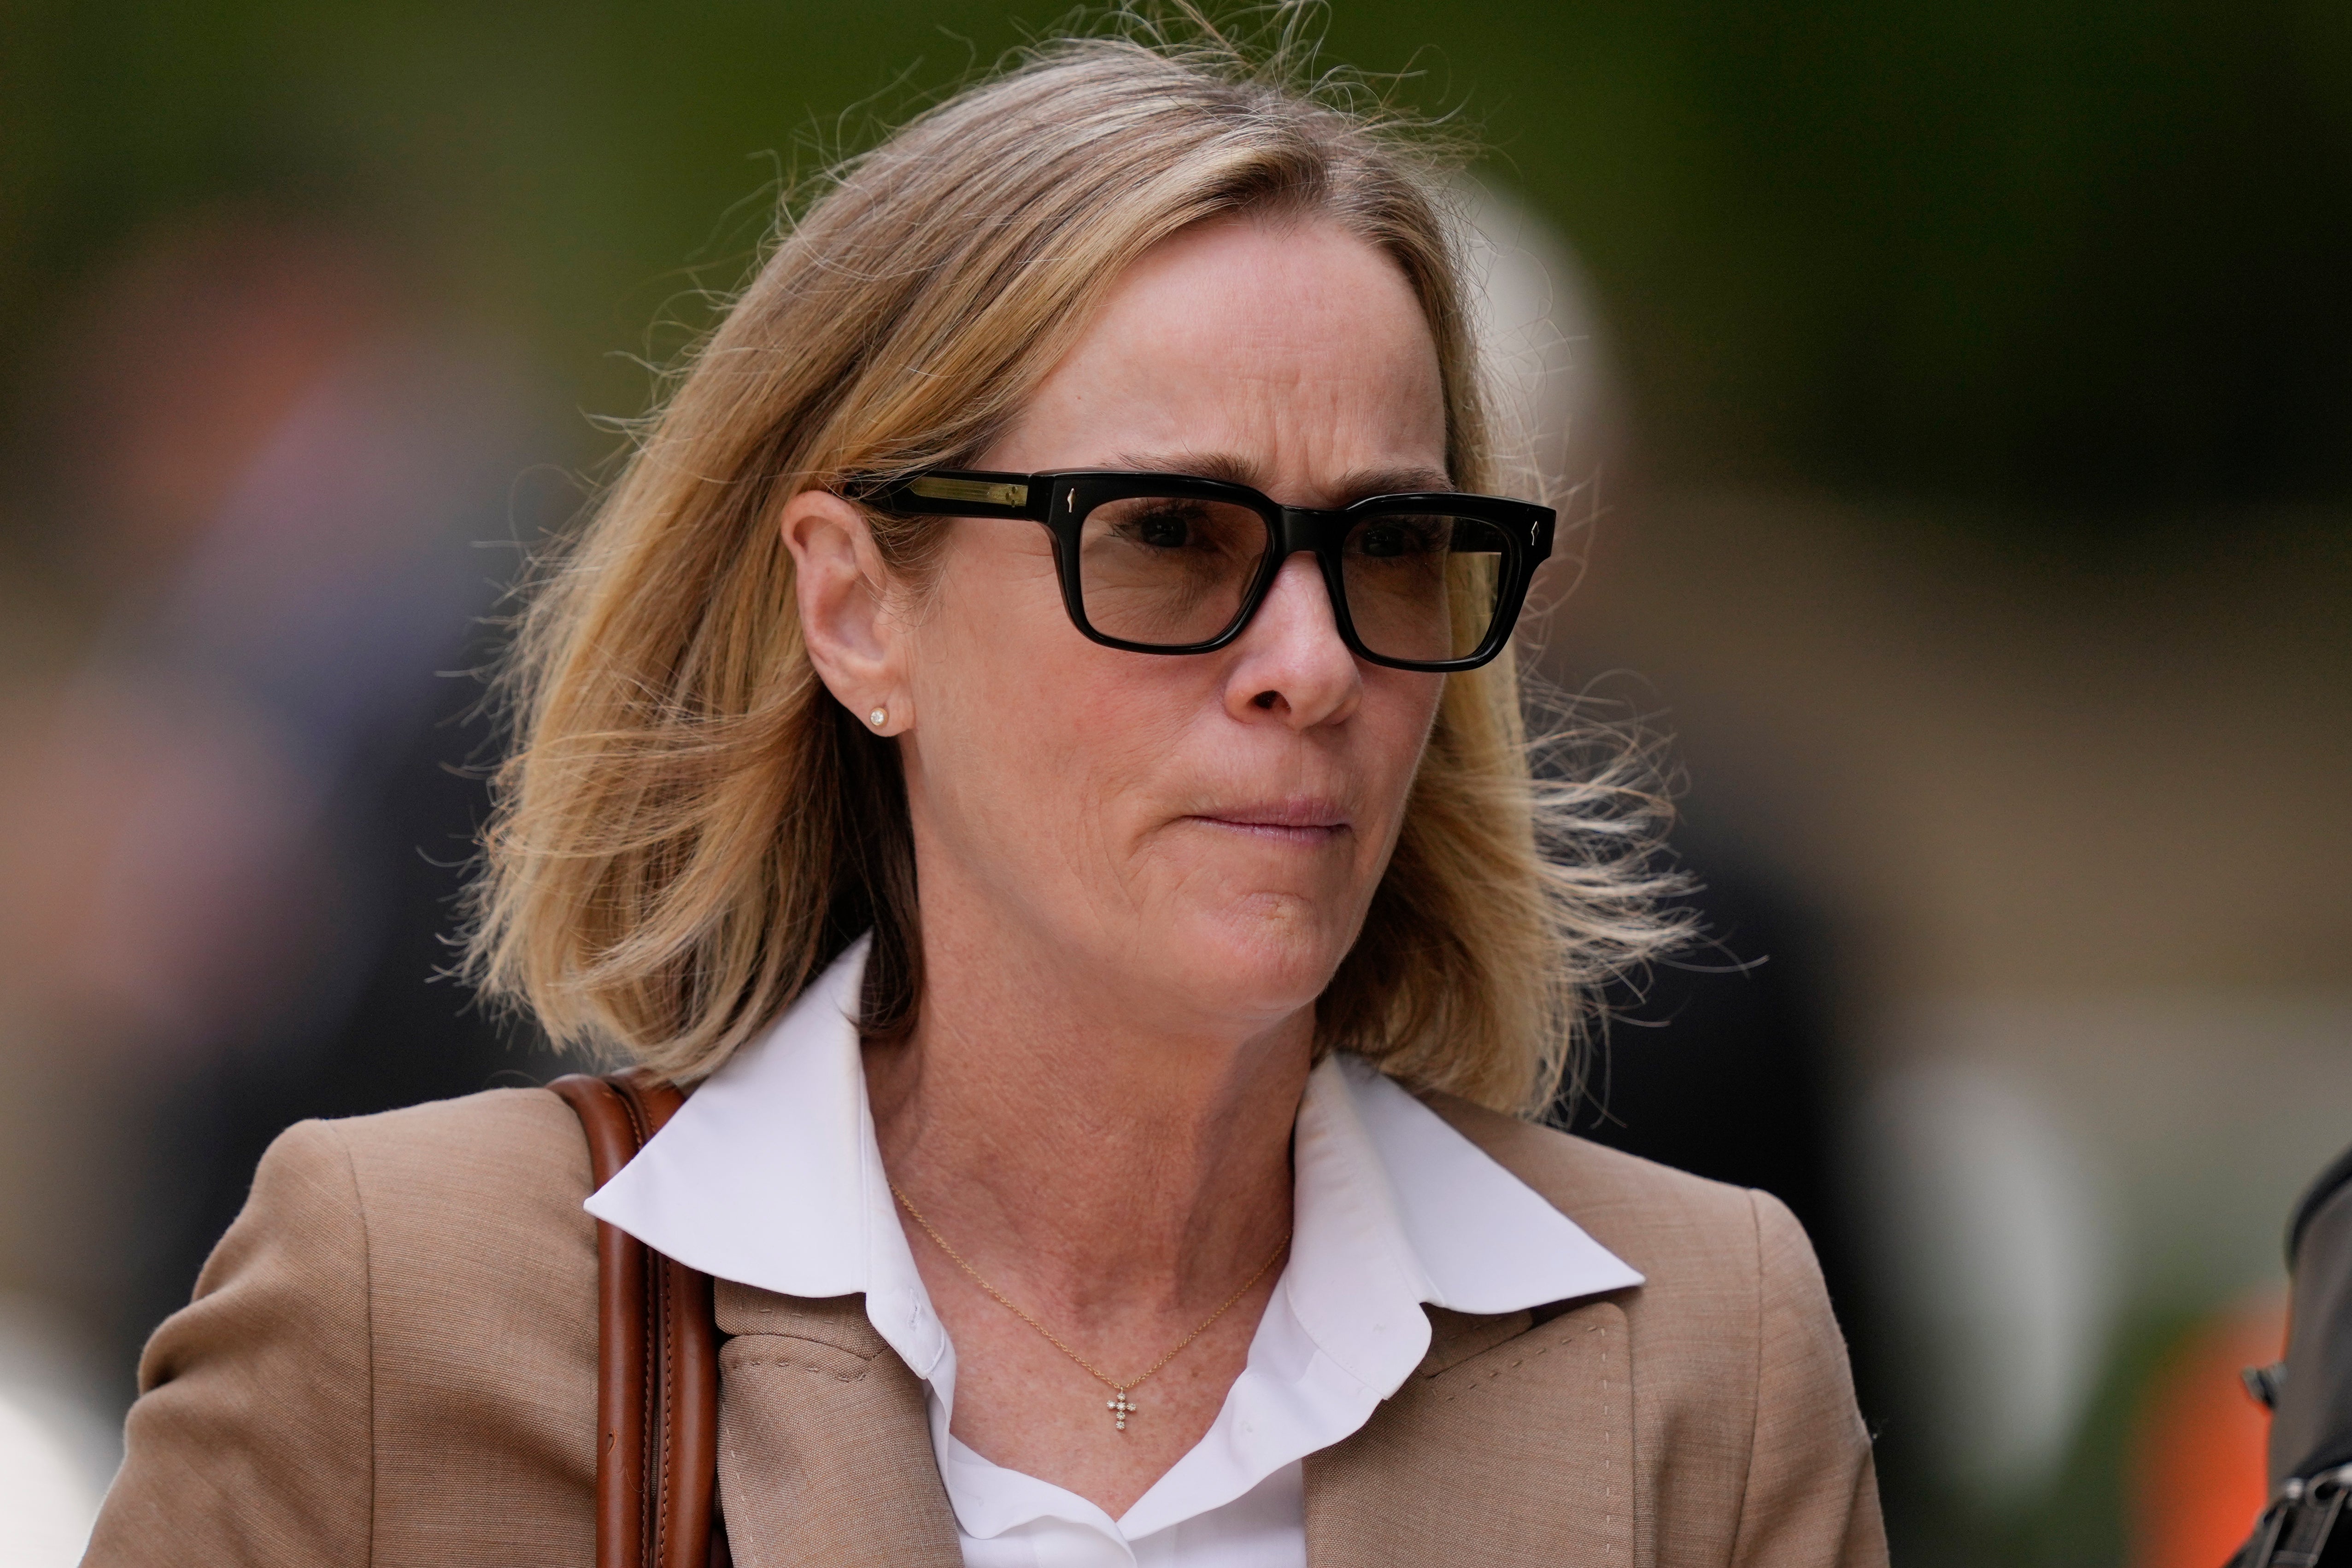 Kathleen Buhle, Hunter Biden’s ex-wife, leaves court on 5 June after speaking about how she found drugs at their DC home